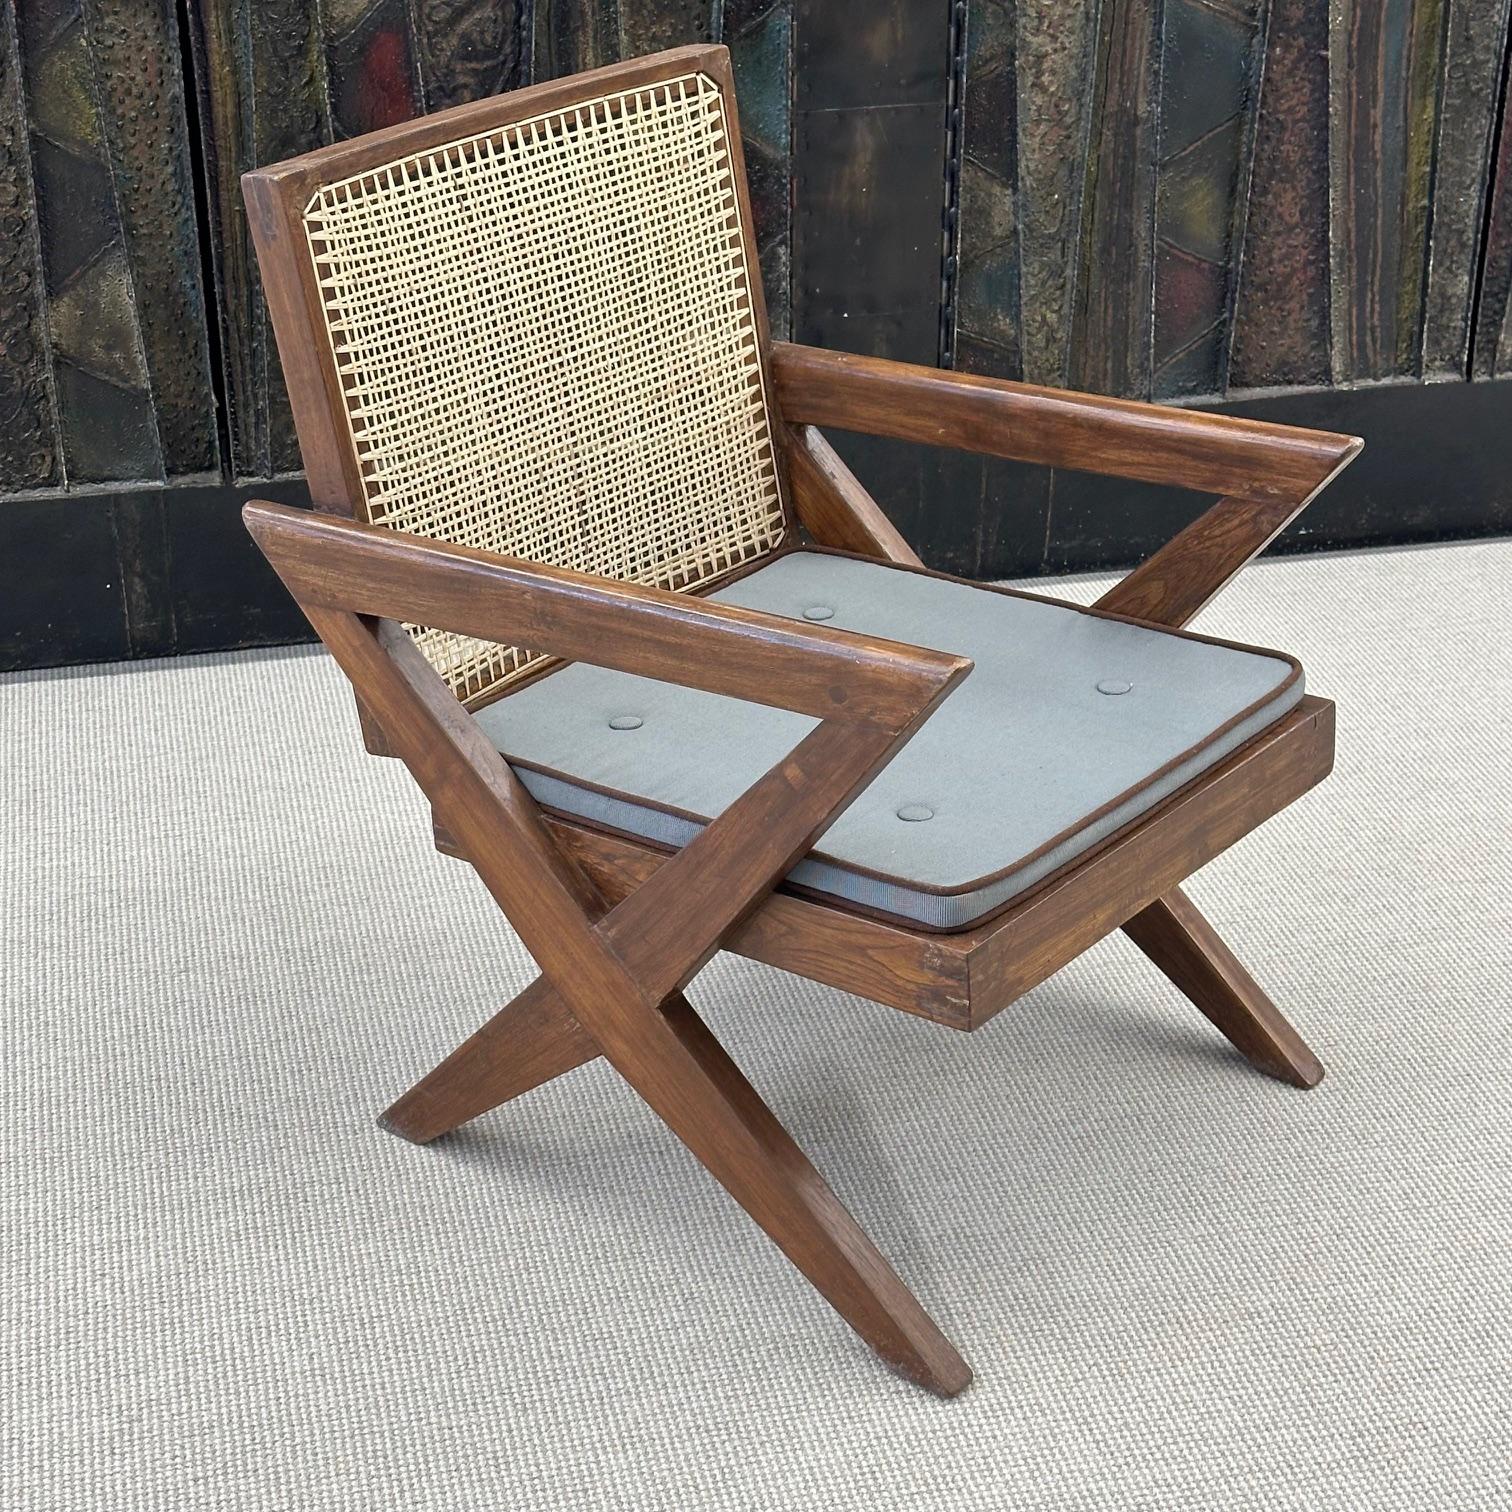 Pierre Jeanneret, French Mid-Century Modern, Lounge Chairs, Chandigarh, 1950s For Sale 2